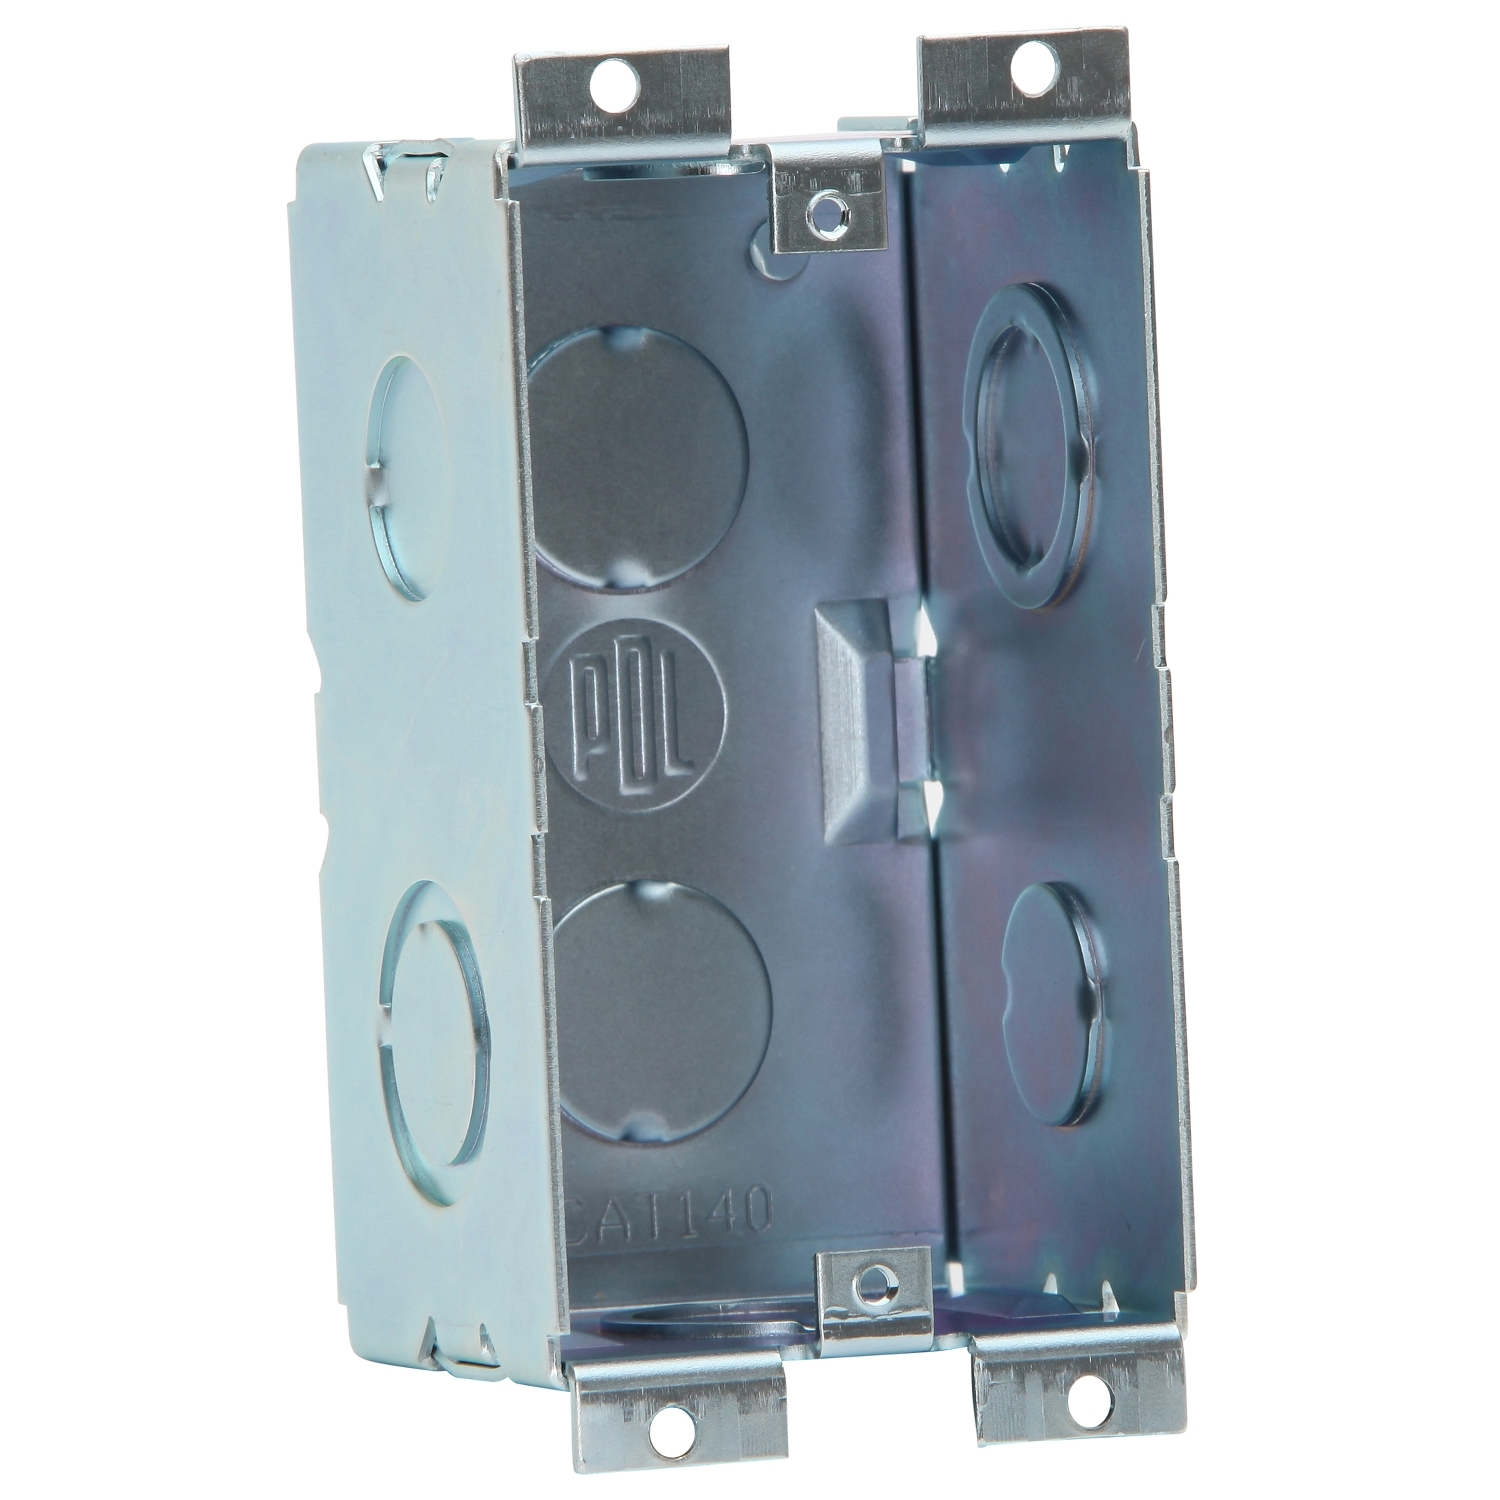 PDL140C - PDL Metal Wall Box 1Gang 50mm for Concrete Installations